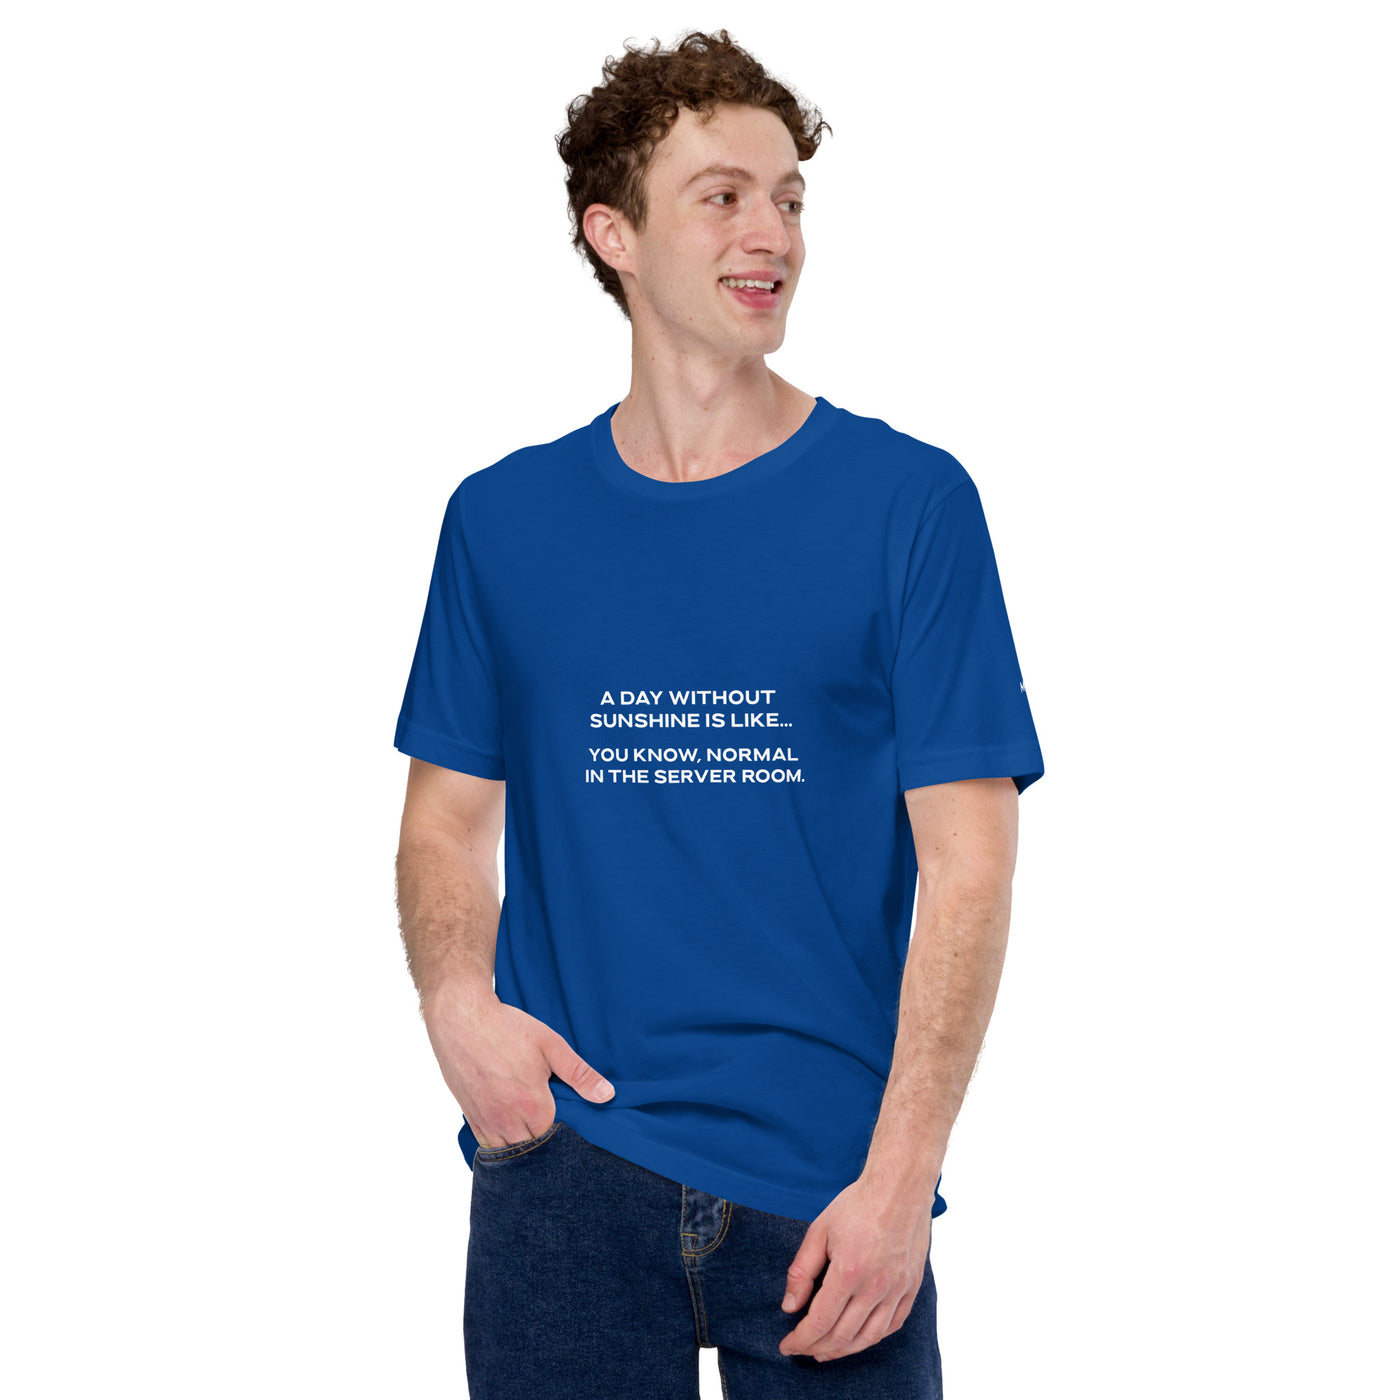 A day without sunshine is like you know, normal in the server room V1 - Unisex t-shirt